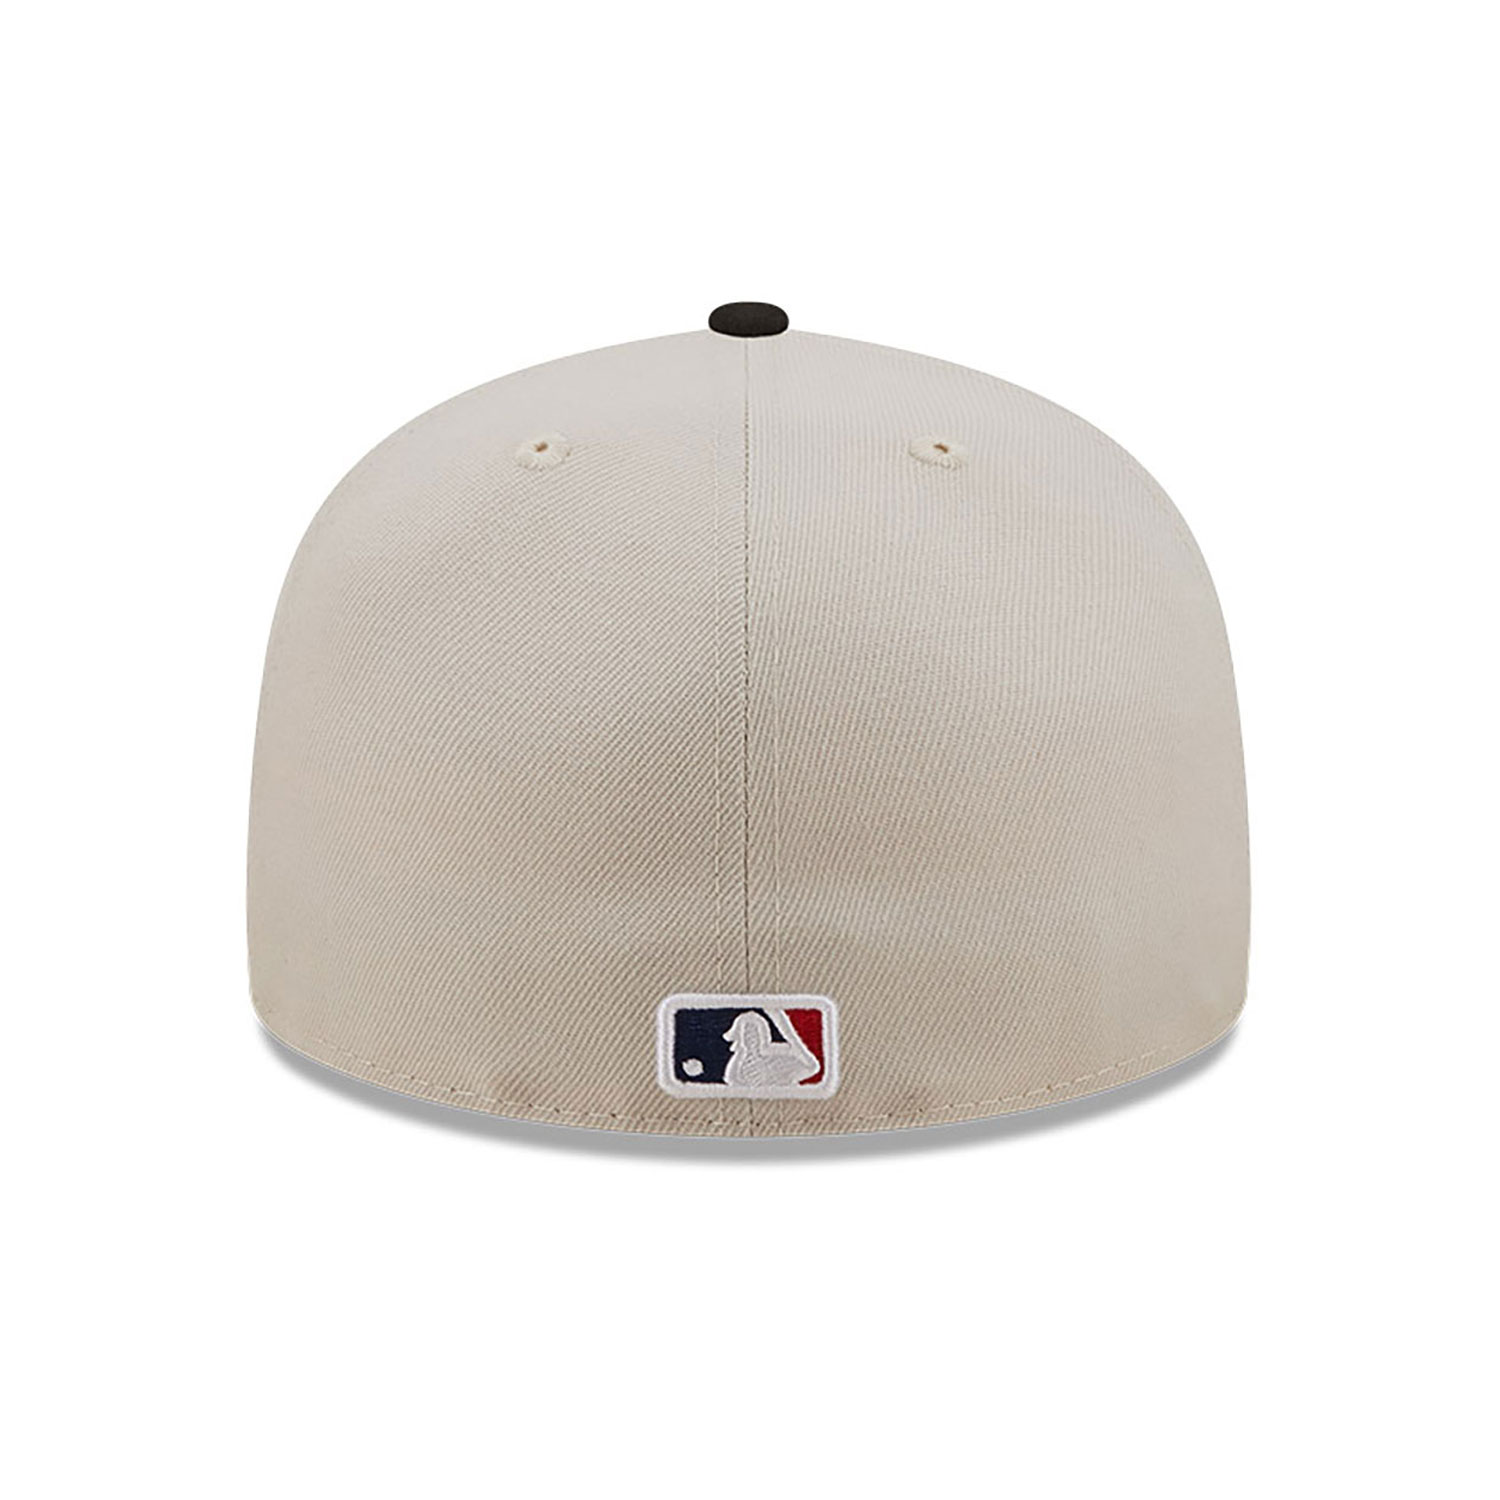 Houston Astros Fall Classic White 59FIFTY Fitted Cap